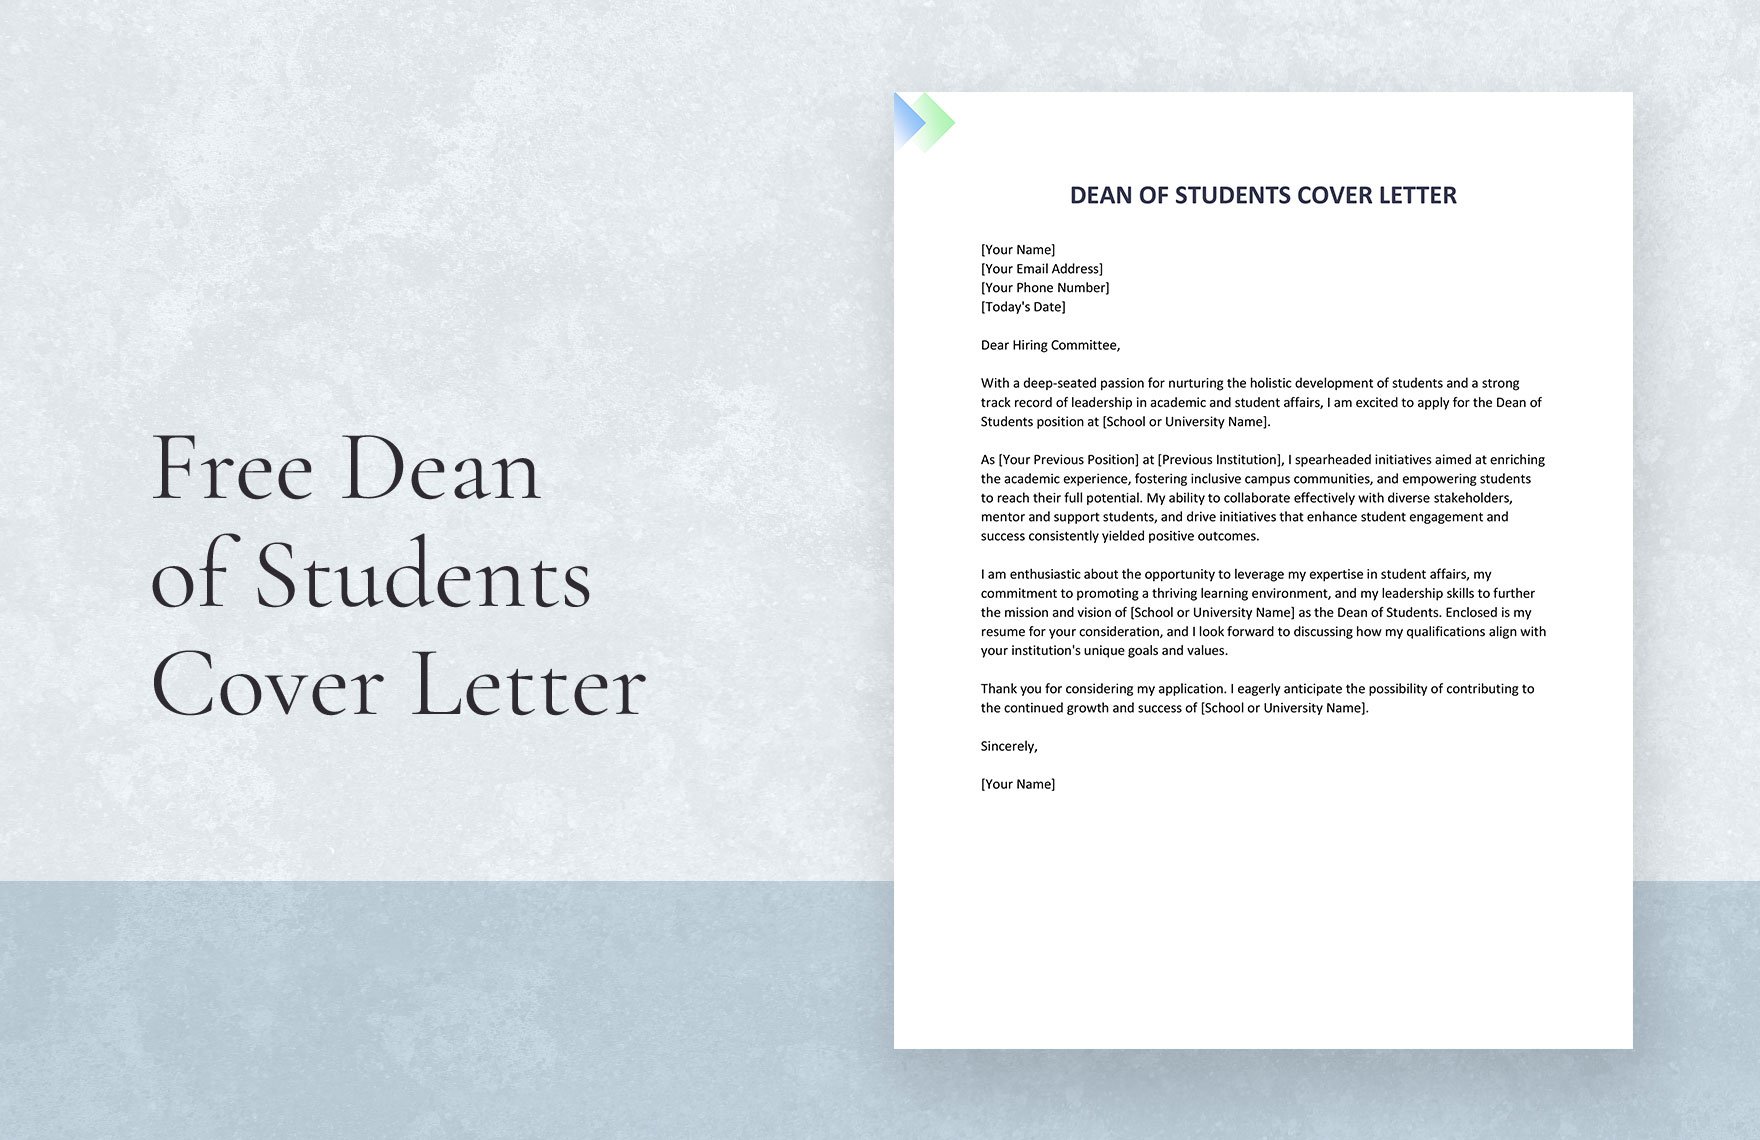 Dean of Students Cover Letter in Word, Google Docs